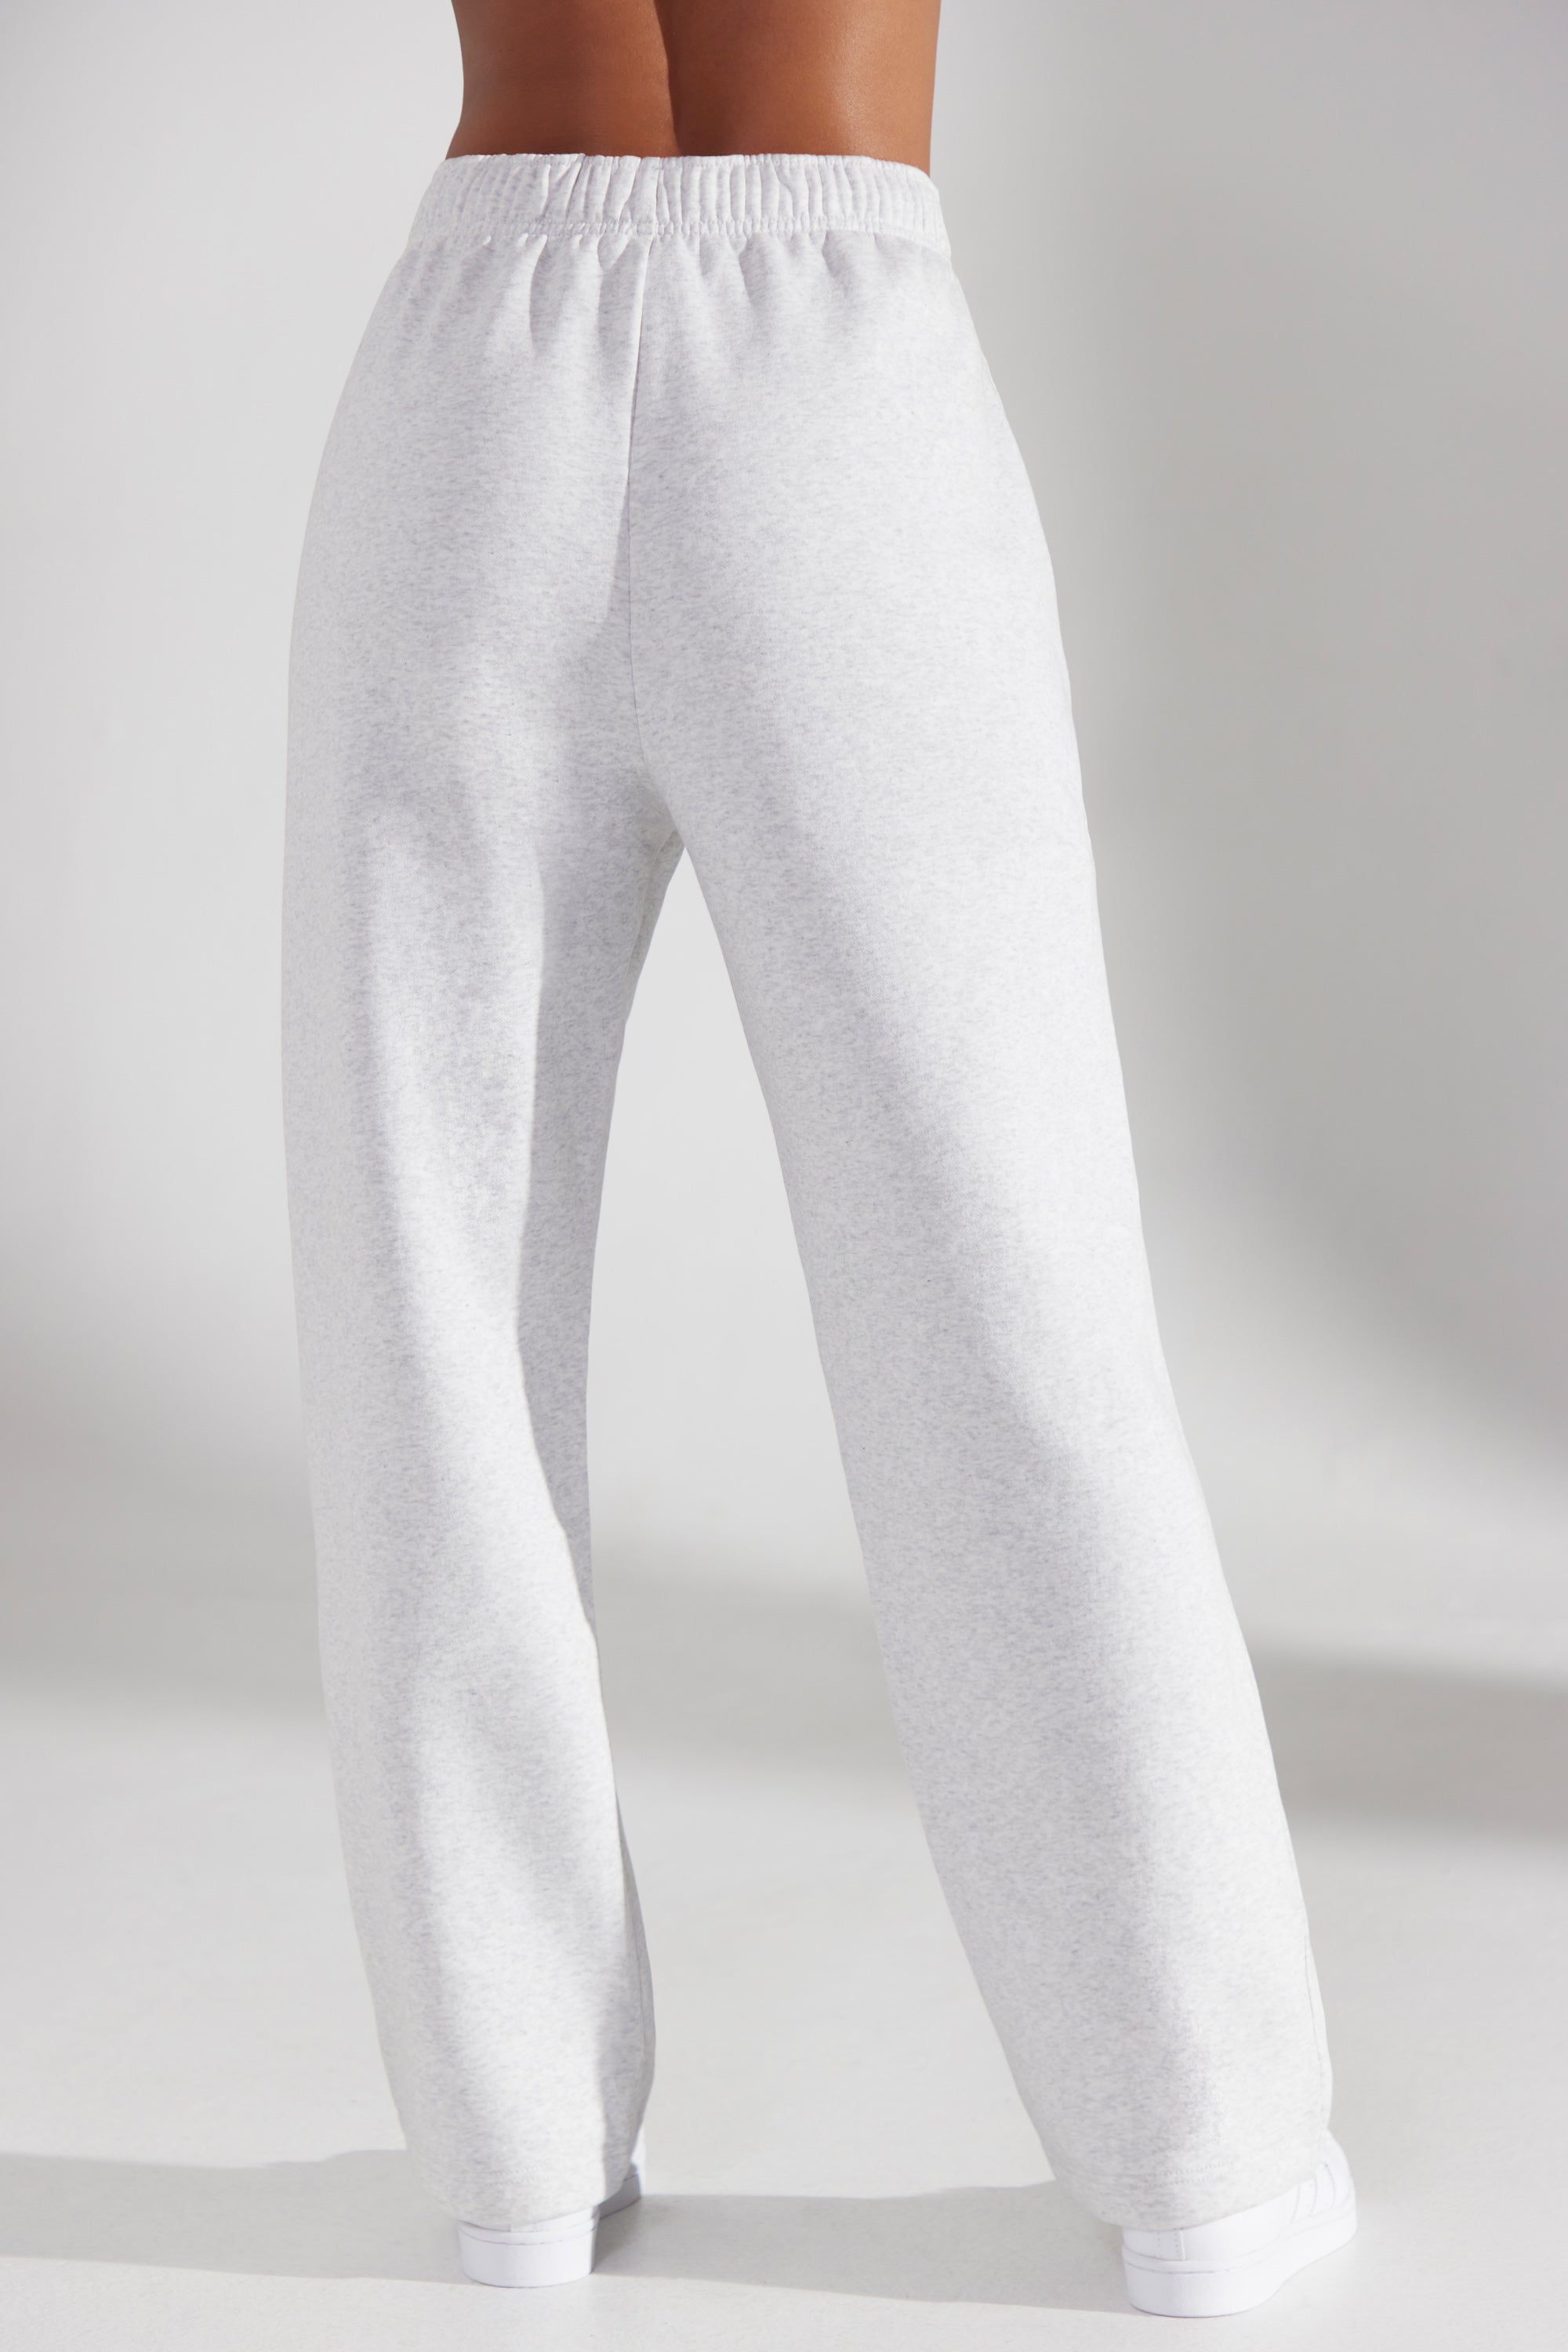 Pacific - Relaxed Fit Joggers in Heather Grey